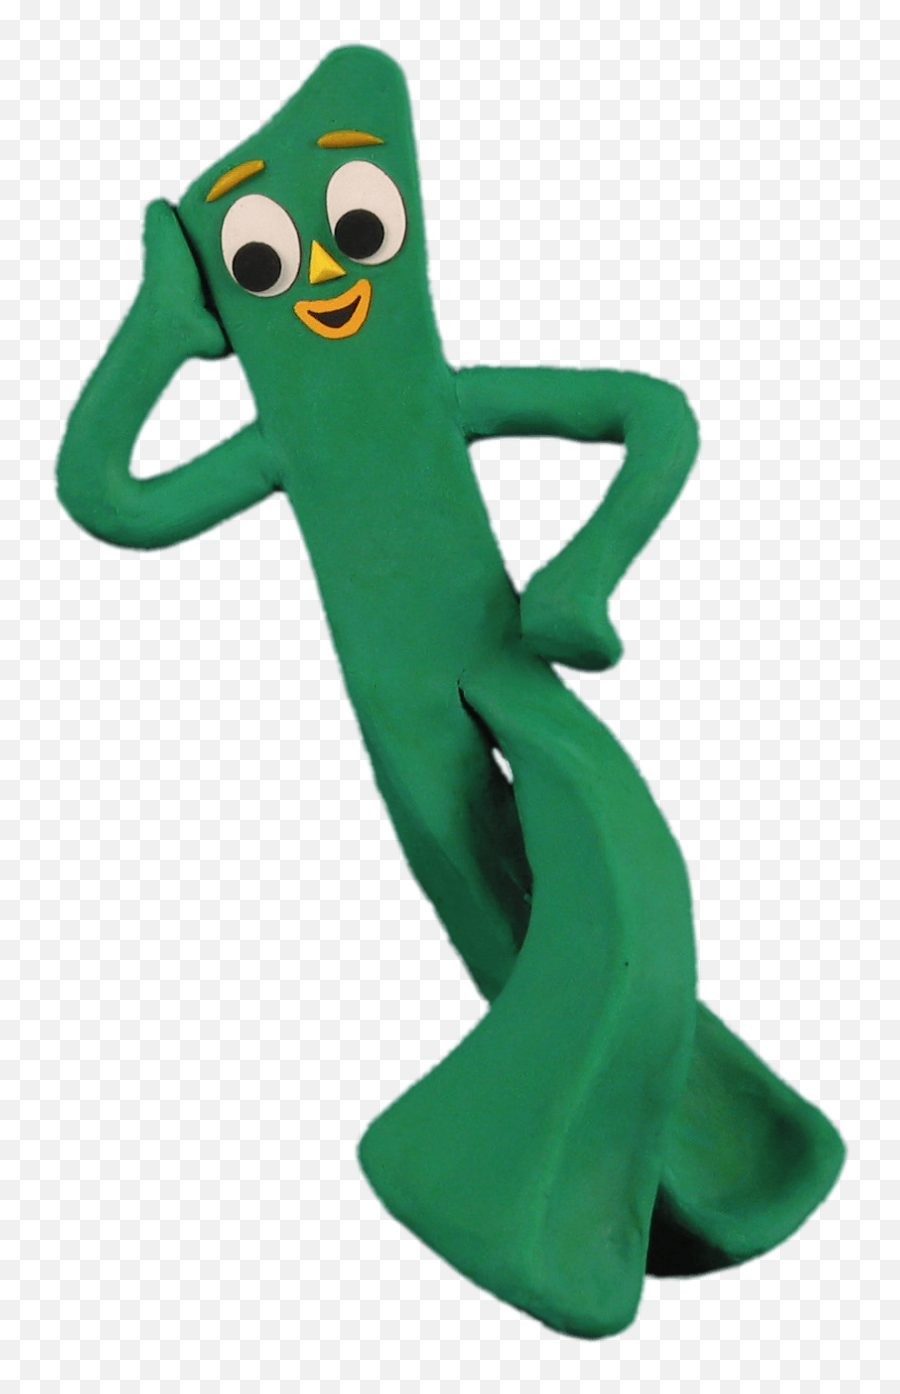 Plasticine Gumby Transparent Png - Gumby Png,Gumby Png